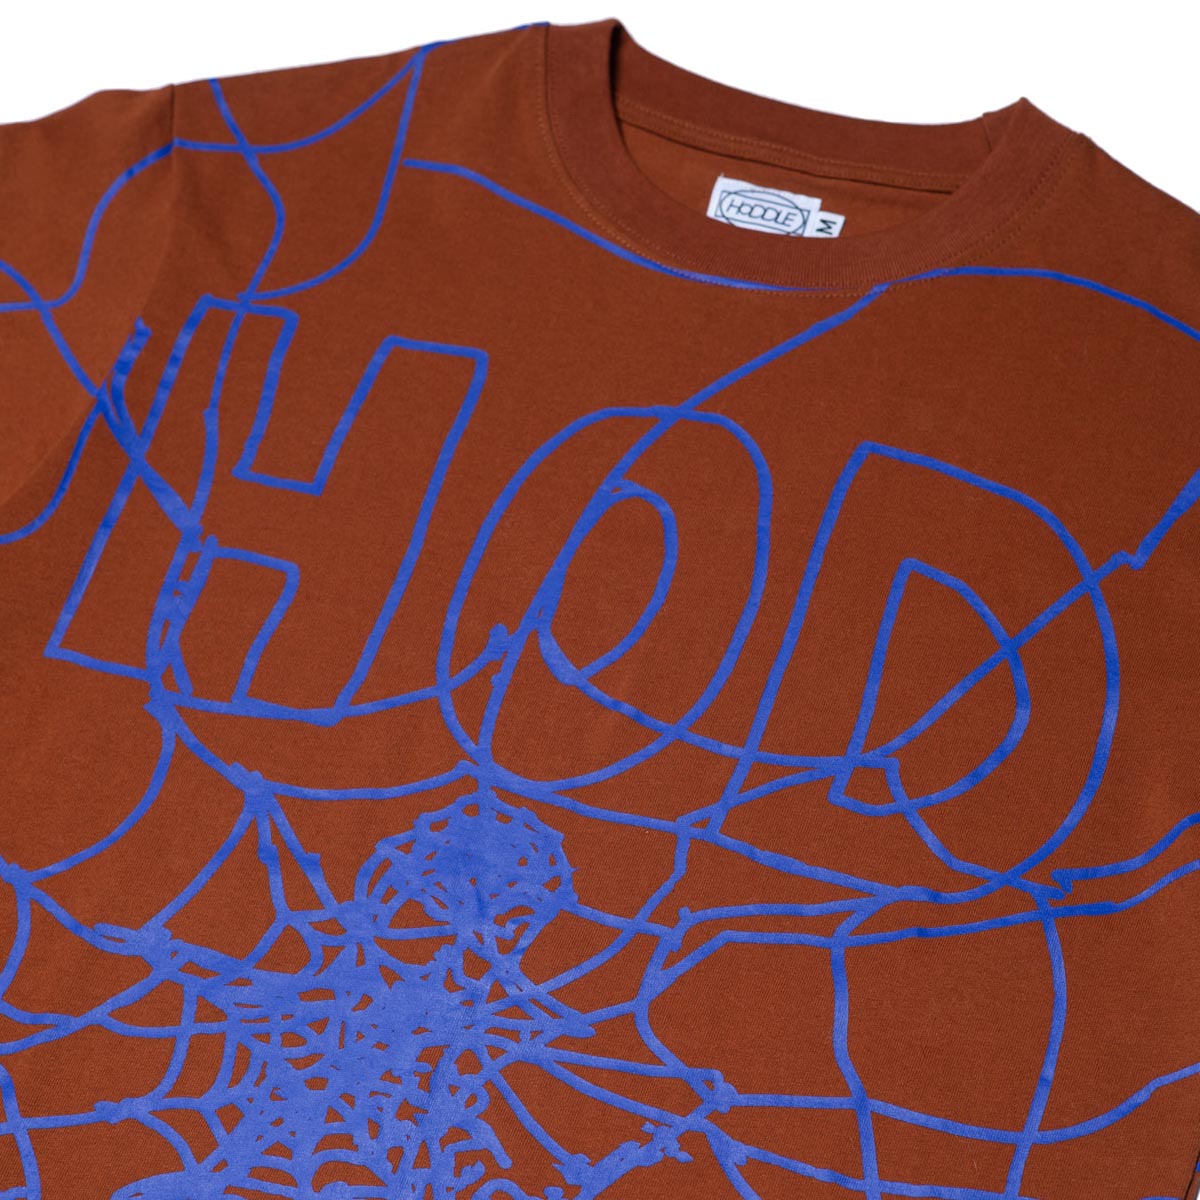 Hoddle Web All Over Print T-Shirt - Brown image 3